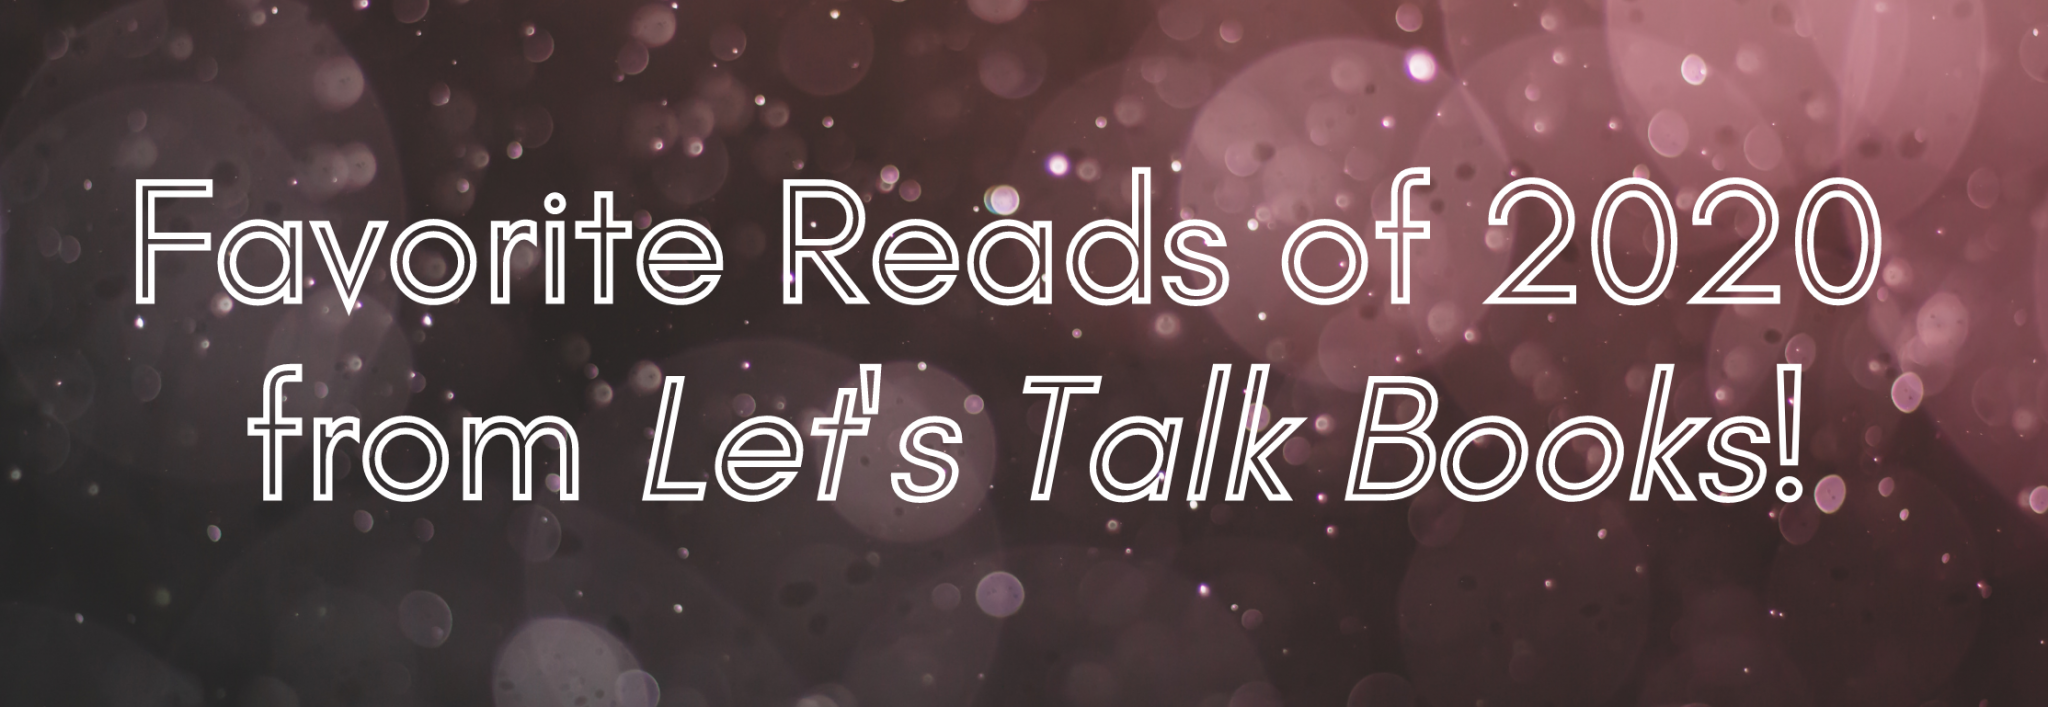 Favorite Reads in 2020 from Let's Talk Books